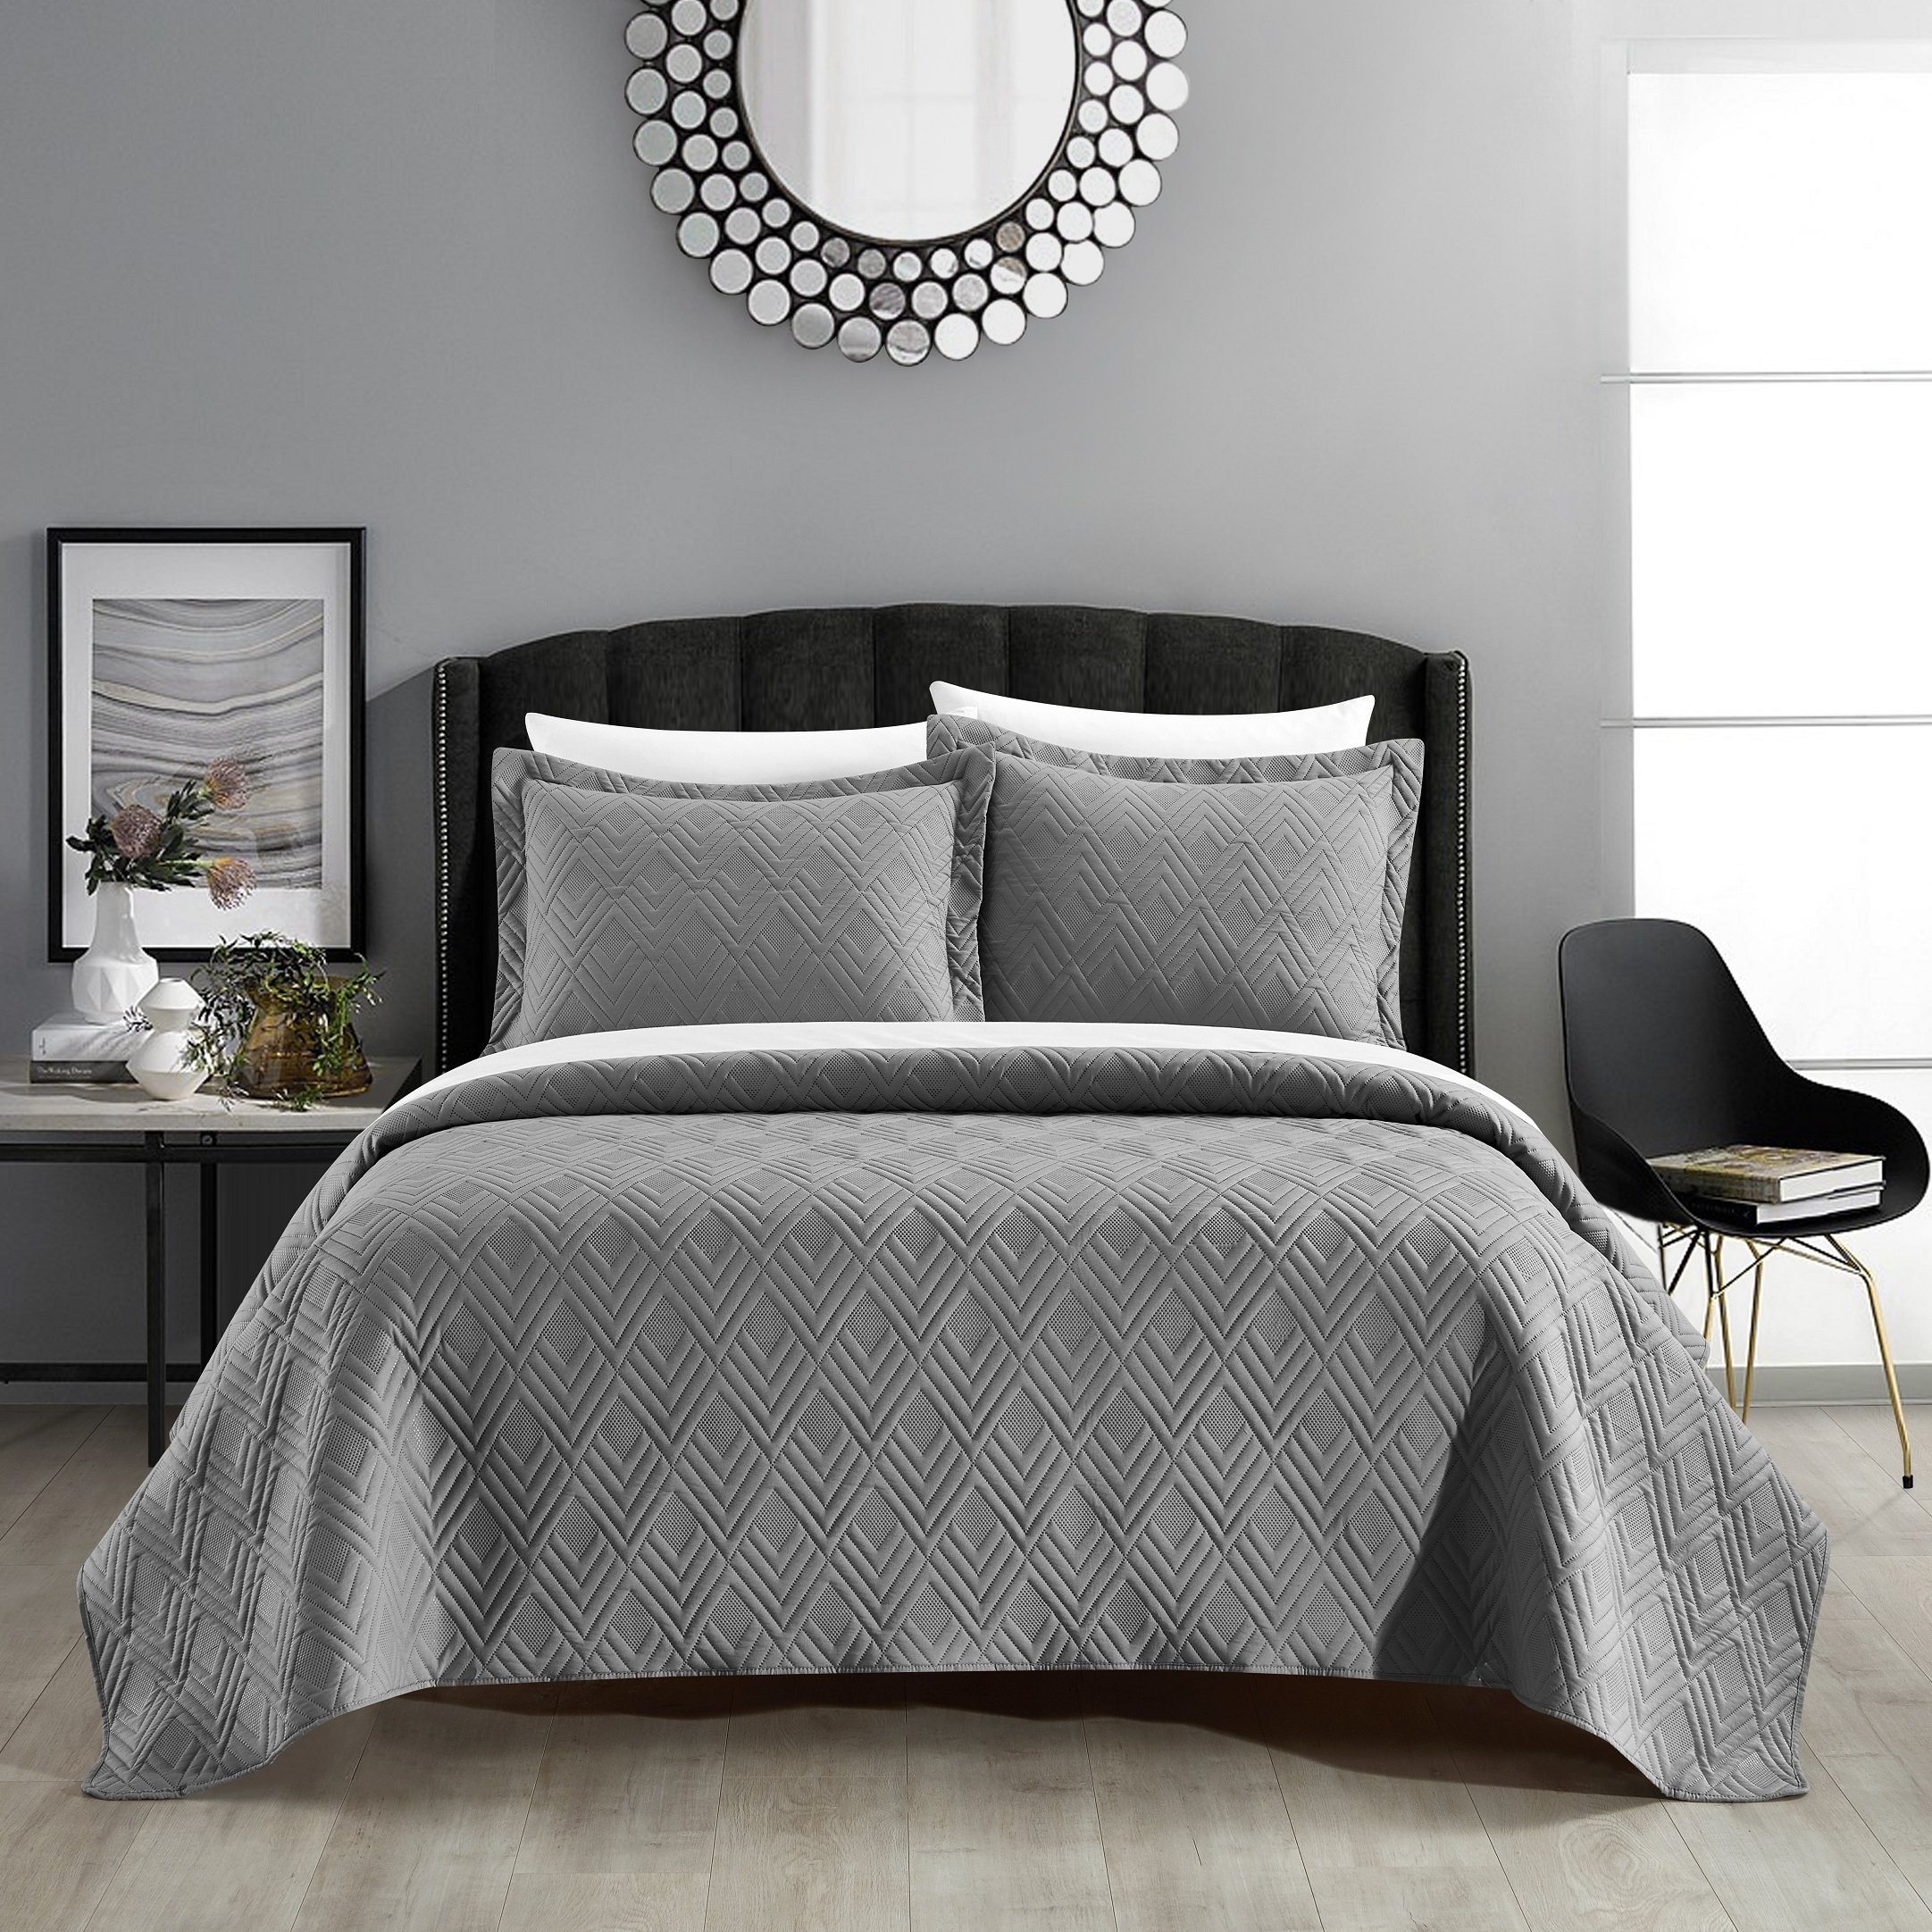 NY&CO Ahling 3 Piece Quilt Set Contemporary Geometric Diamond Pattern Bedding - Grey, King